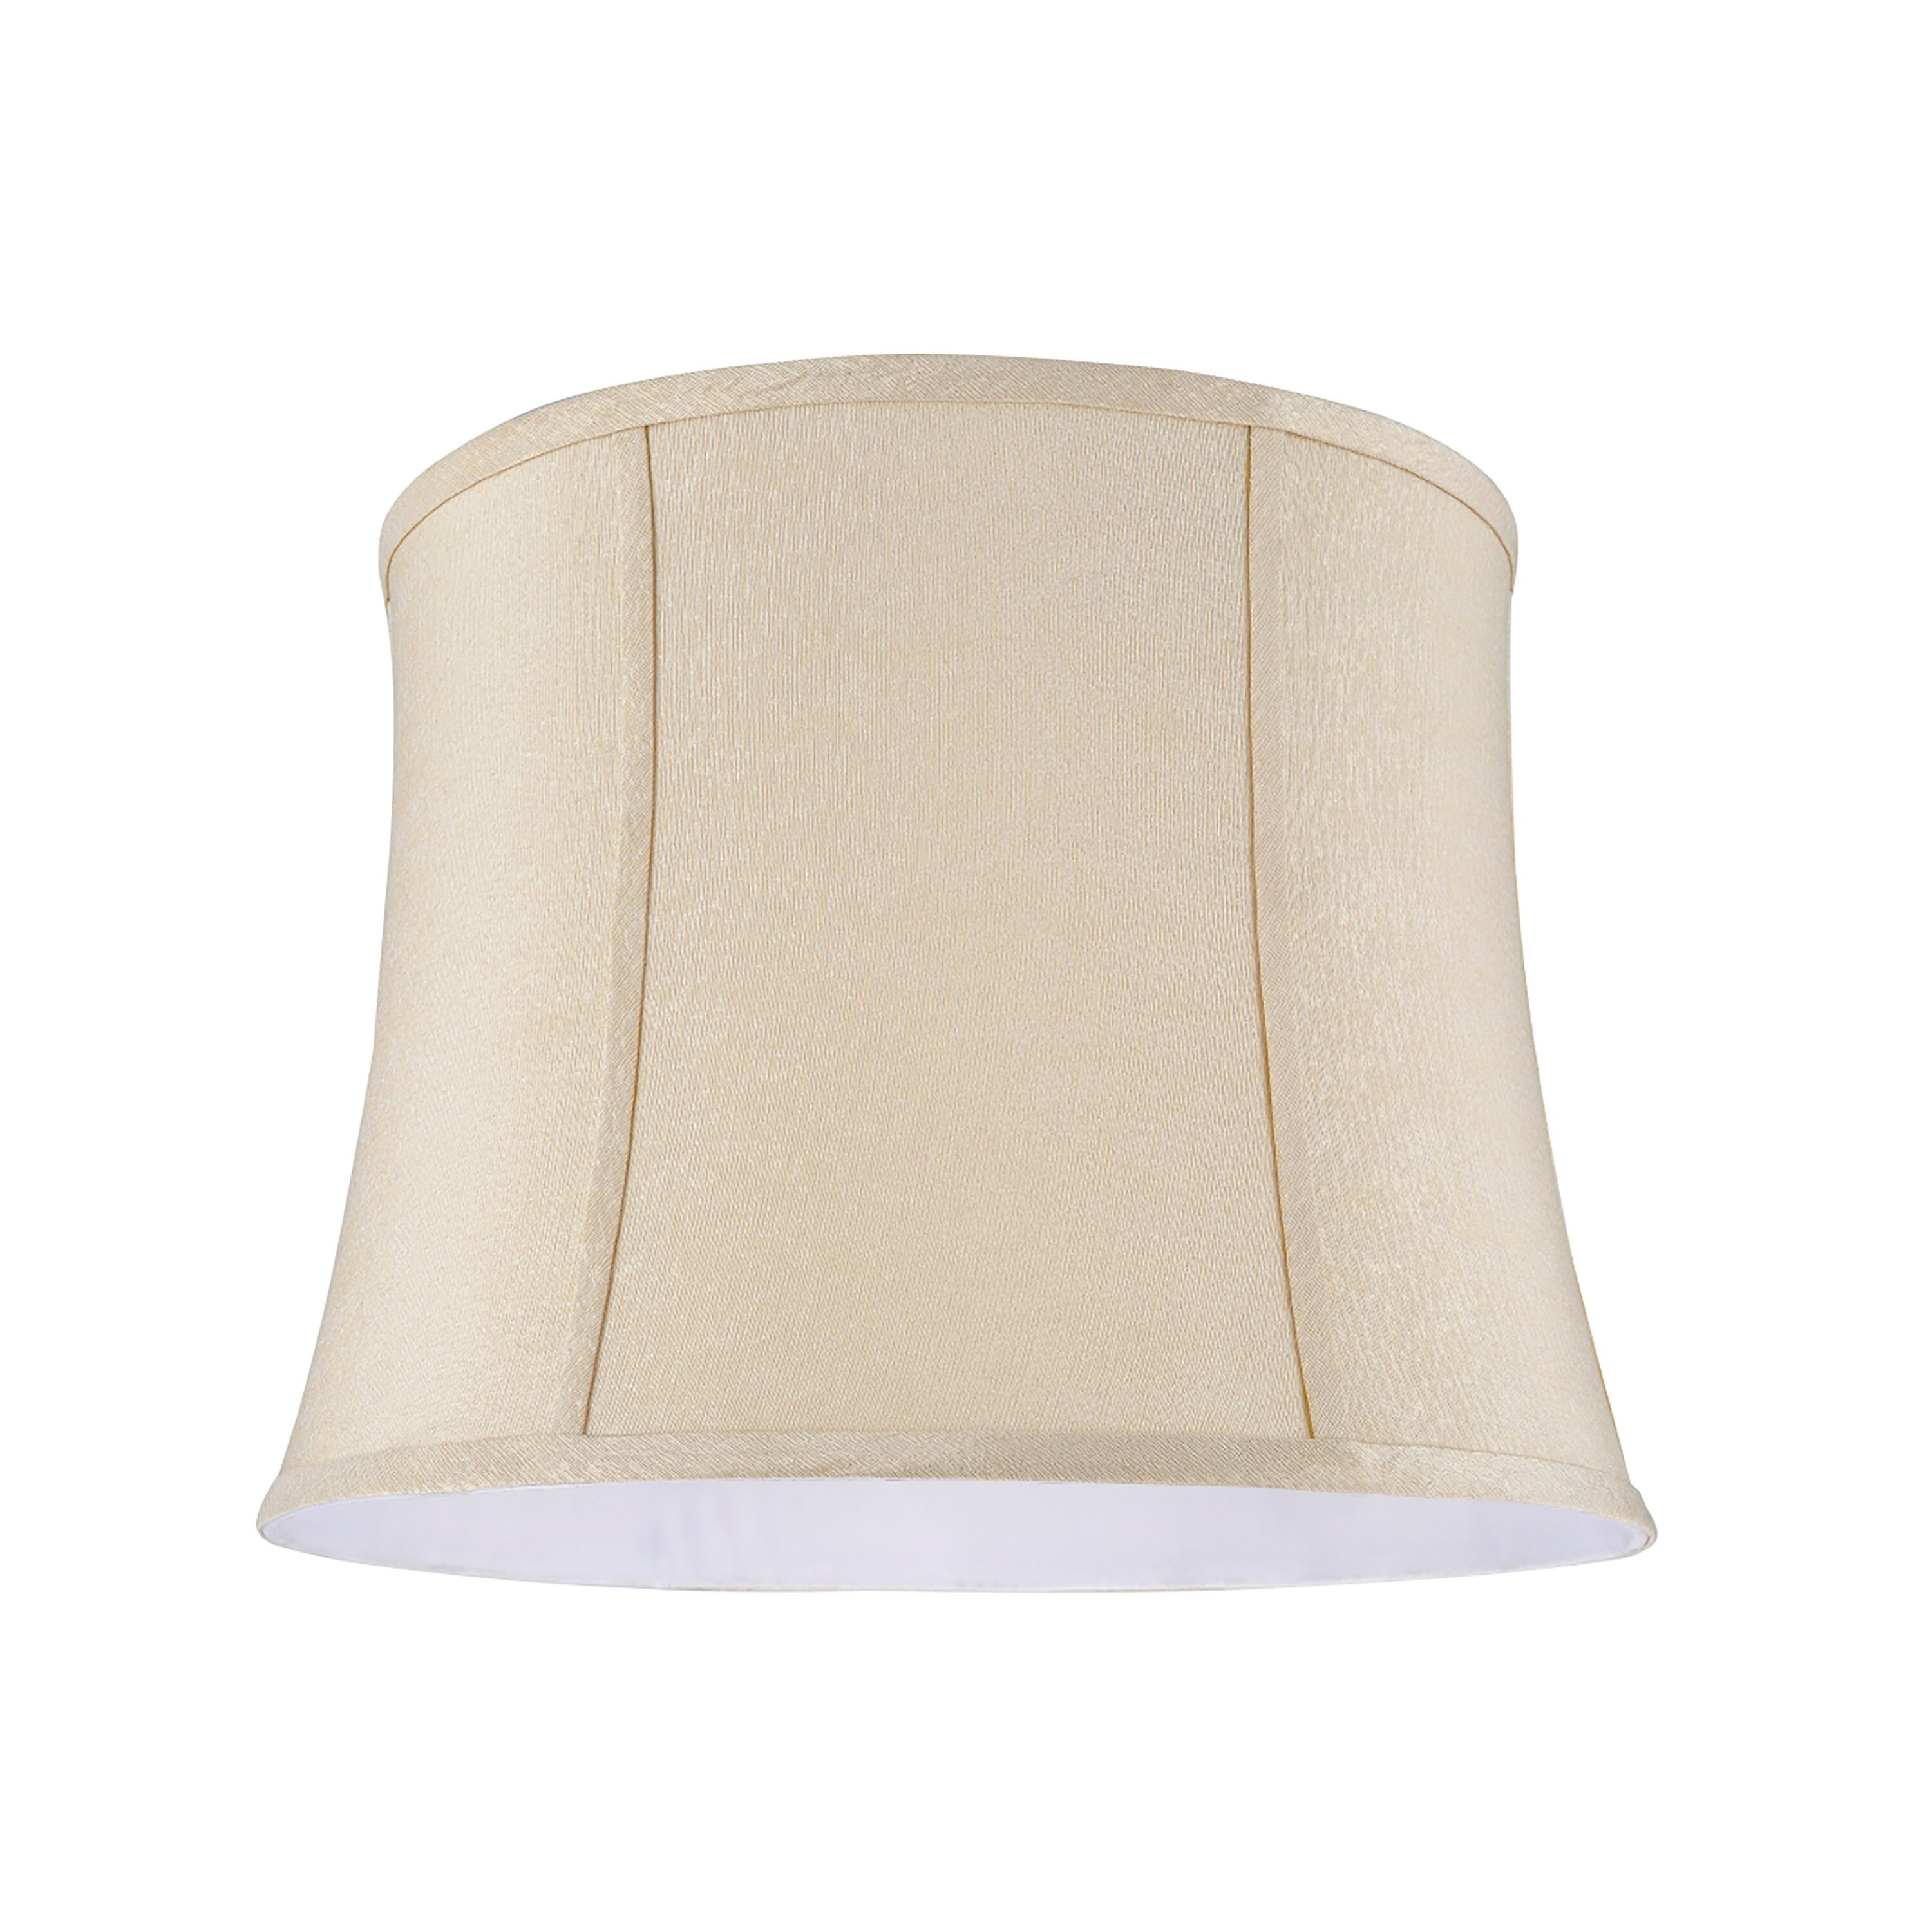 Details about   Aspen Creative 30168 Bell Shape Spider Lamp Shade in Beige 6" x 12" x 9-1/2" 